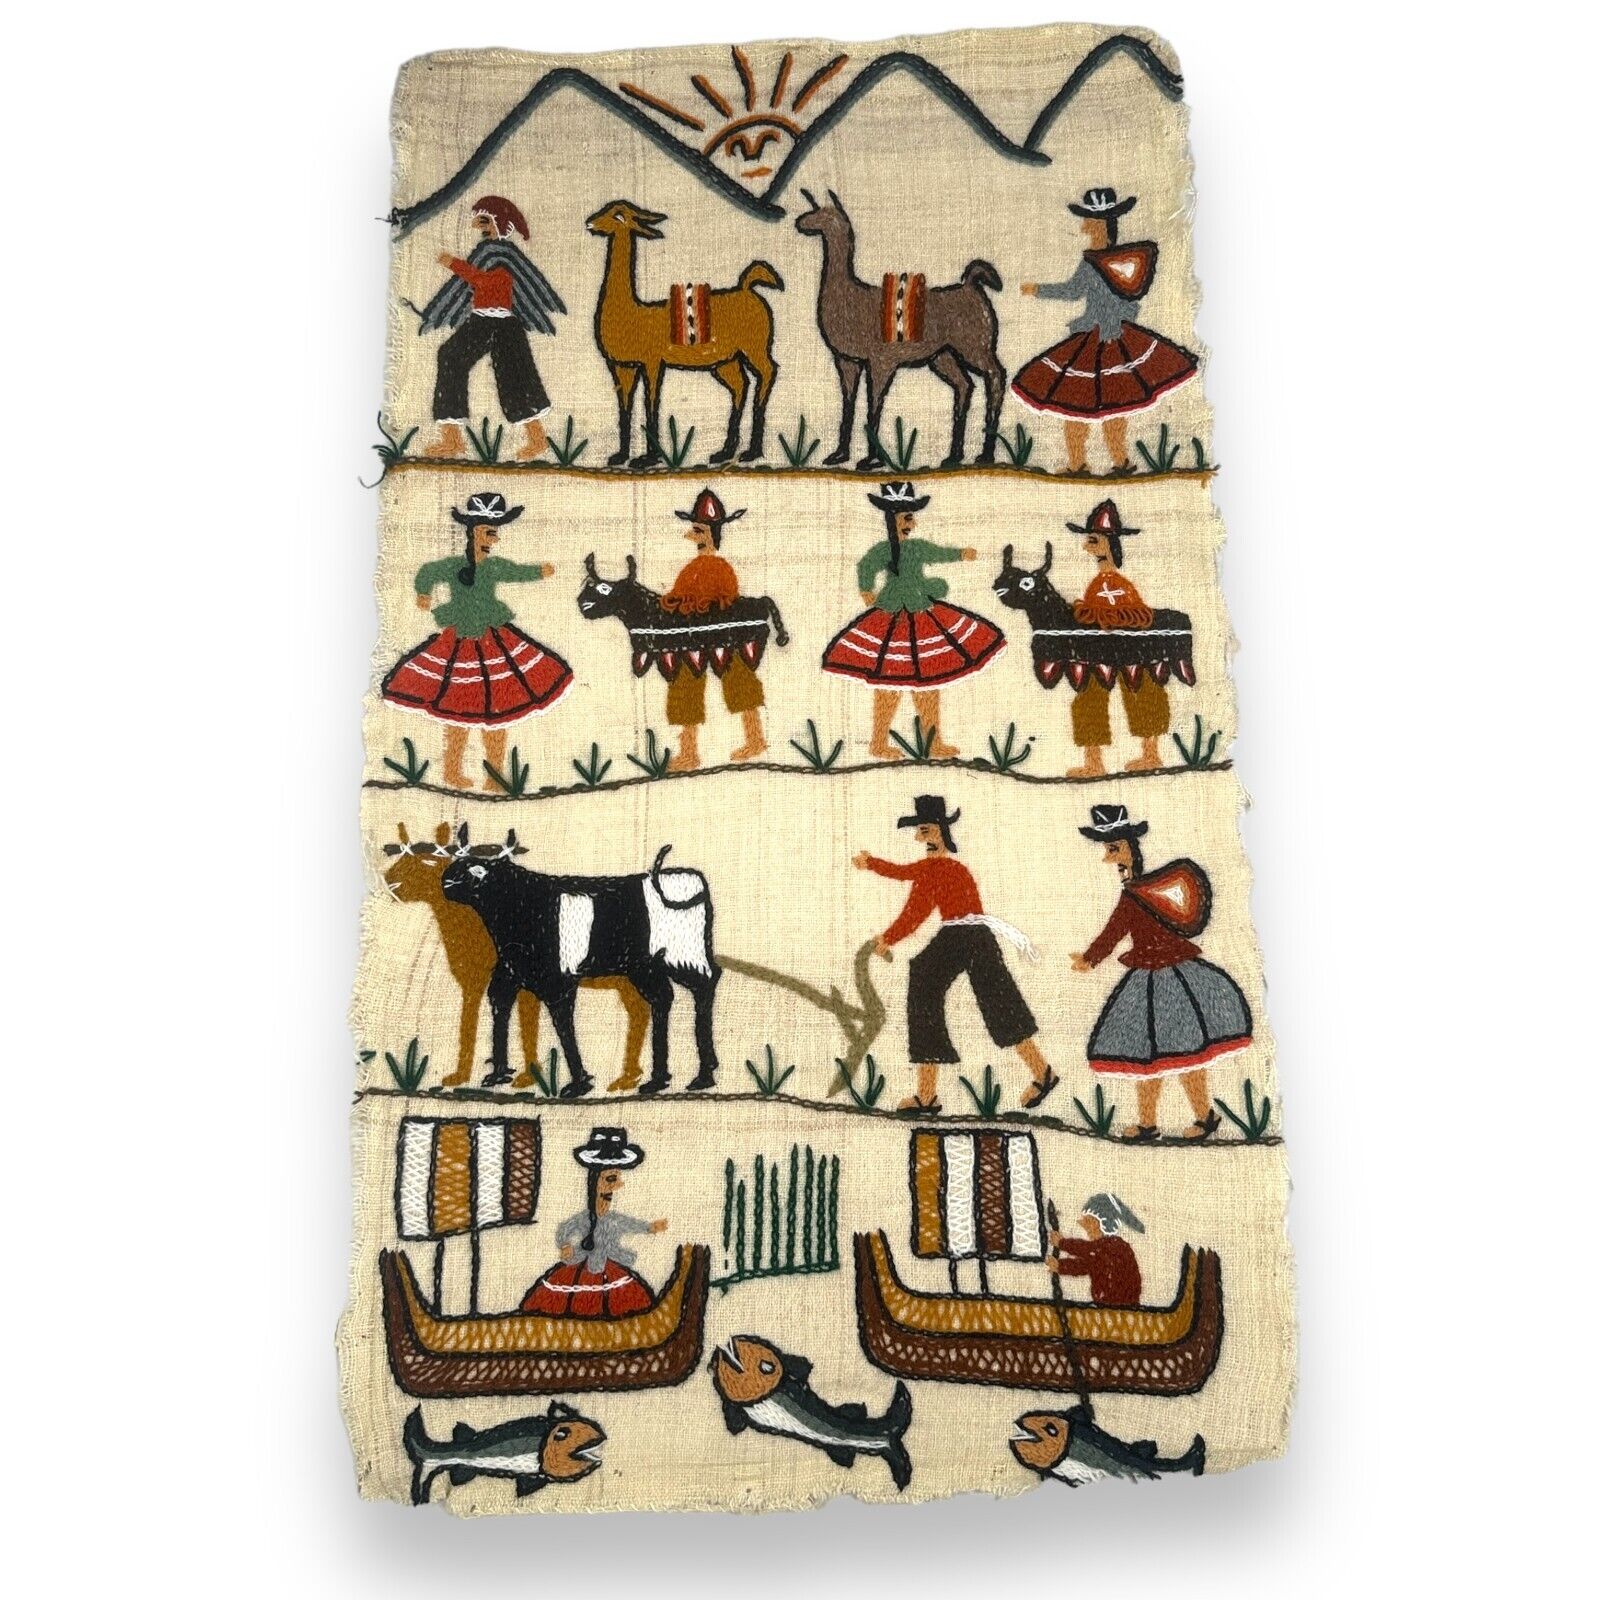 Vintage Peruvian Wall Tapestry Farmer Fisherman Embroidered Handcrafted Large